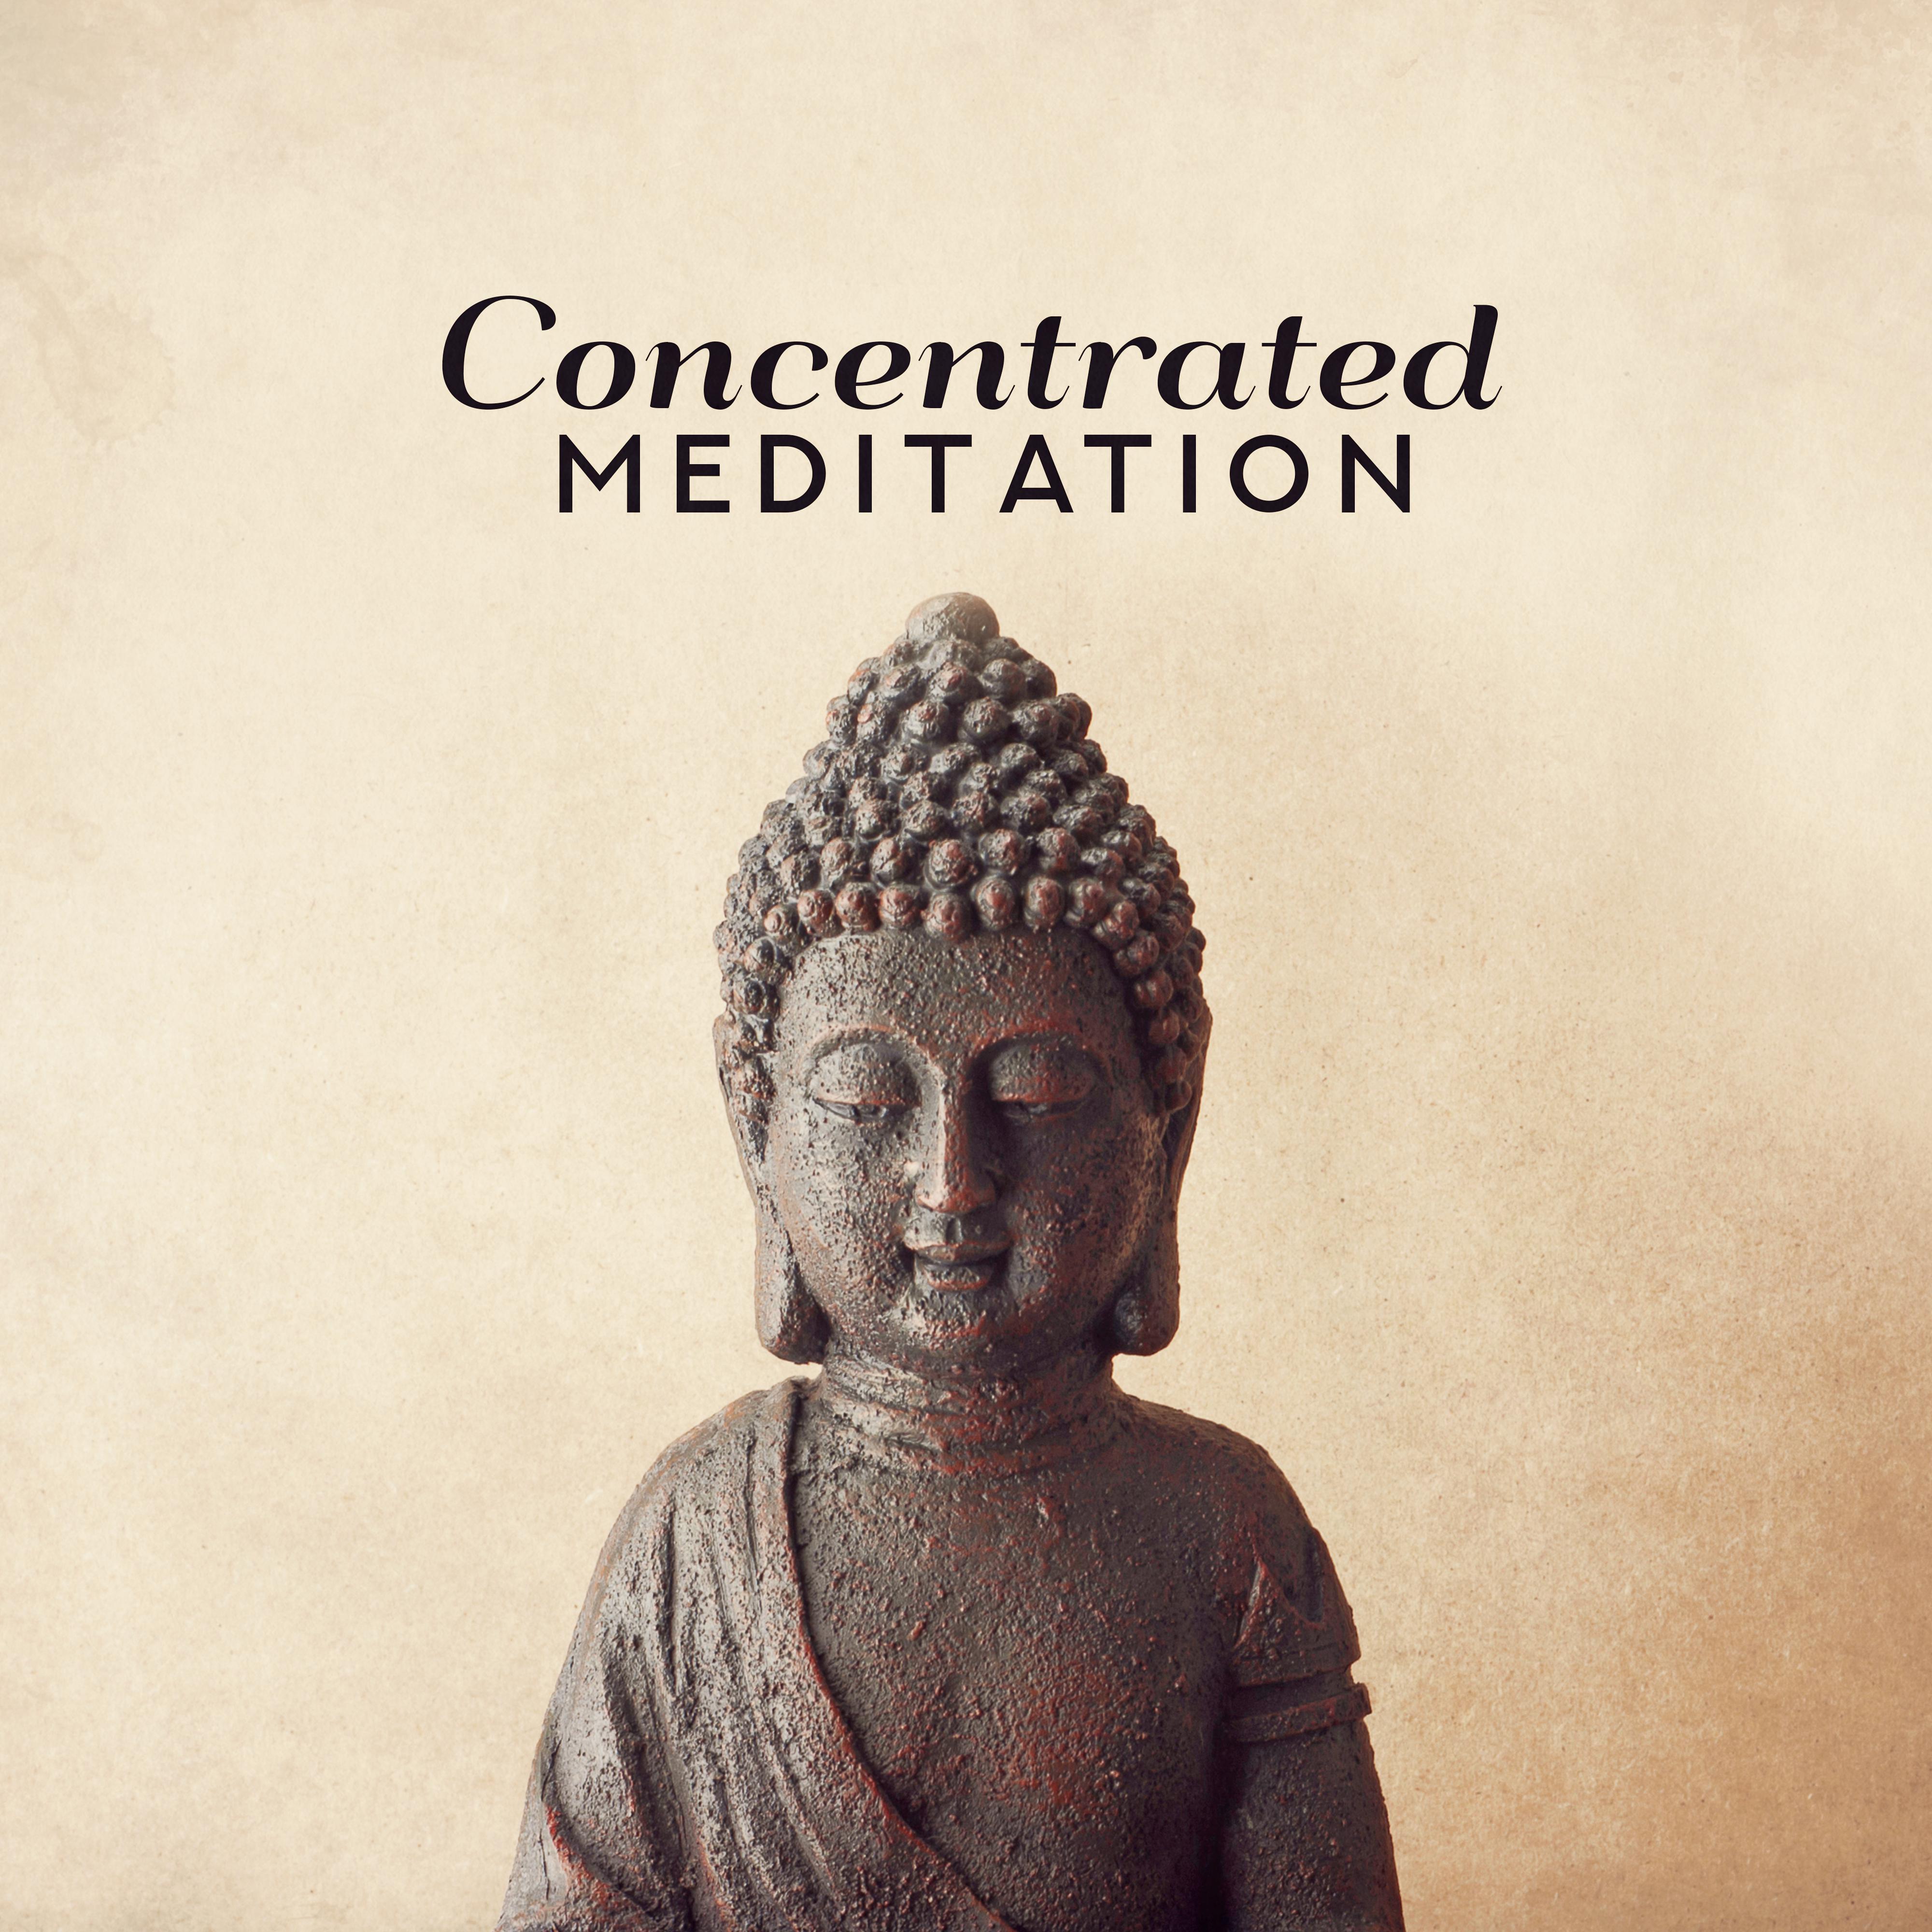 Concentrated Meditation: Music Helping in Mental Acuity, Focus, and Application, Overcoming Distraction and Assisting Patience